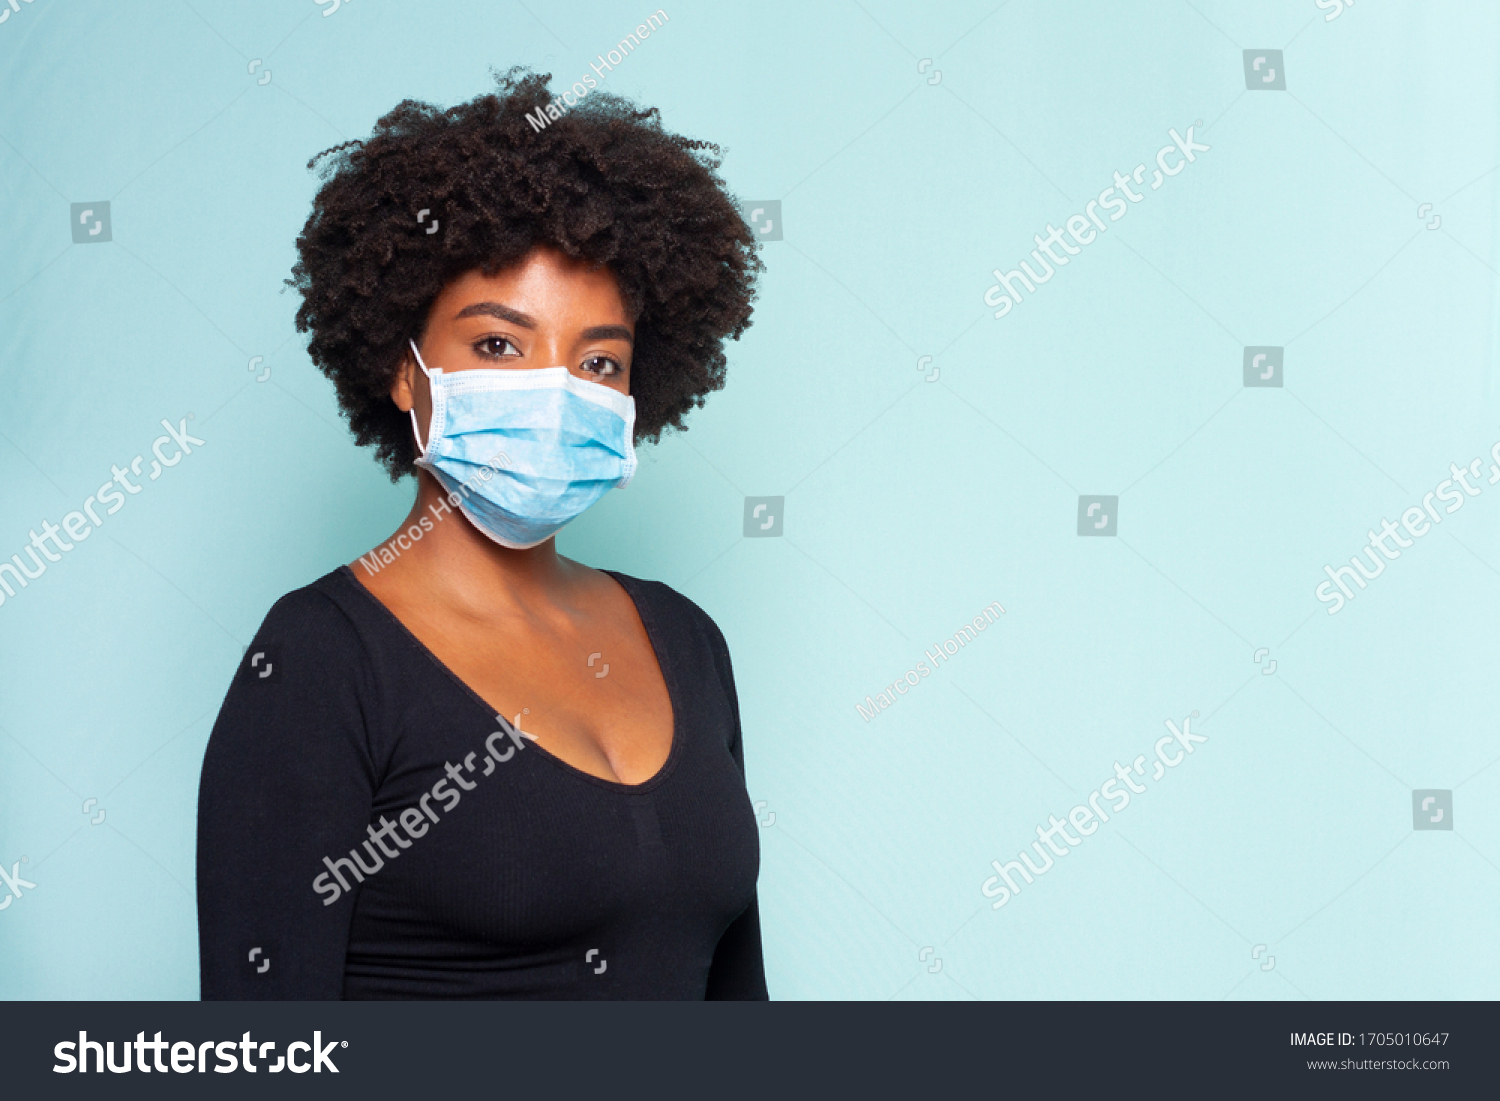 young black model wearing protective mask and black shirt and black power hair #1705010647